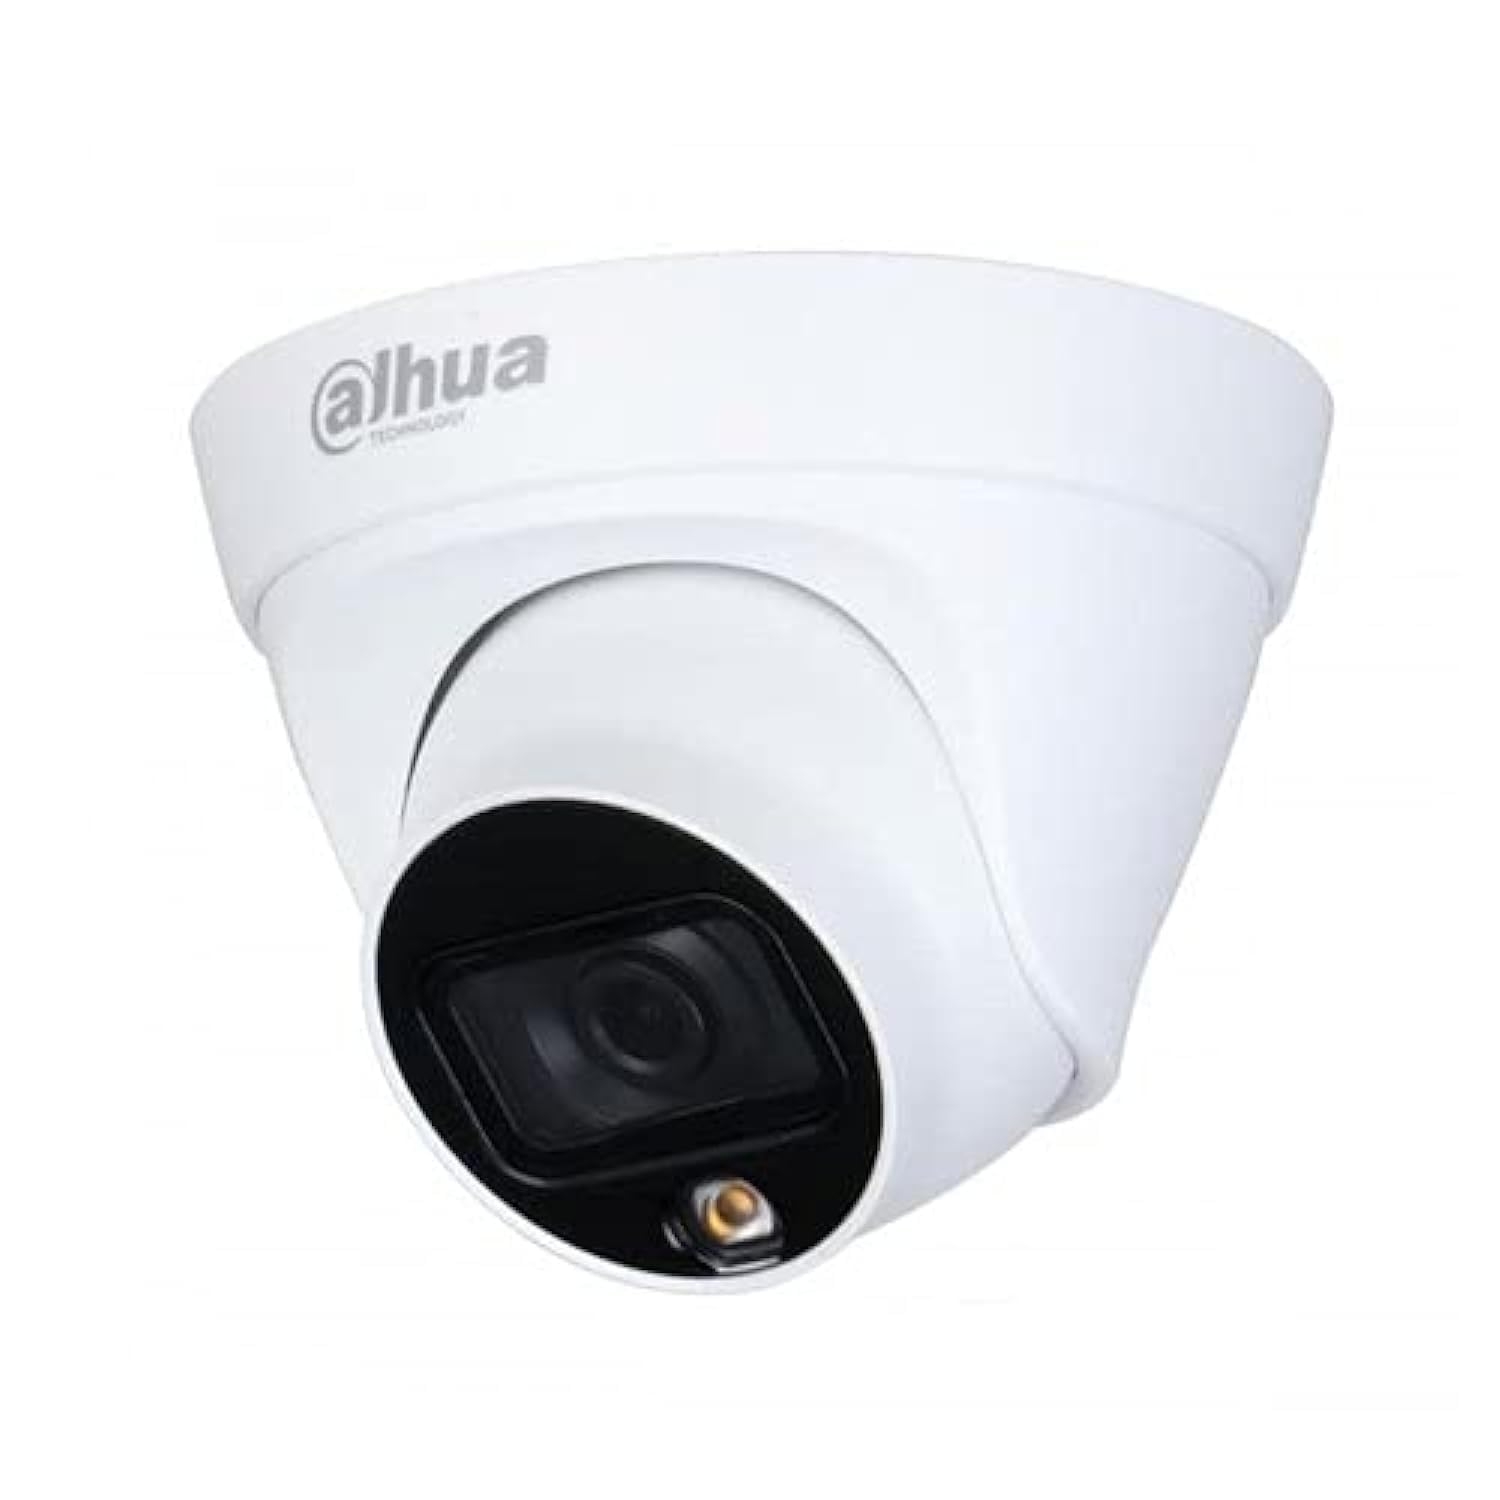 Dahua Wired 2MP IP Dome Full Color Camera, DH-IPC-HDW1239T1P-LED-S4